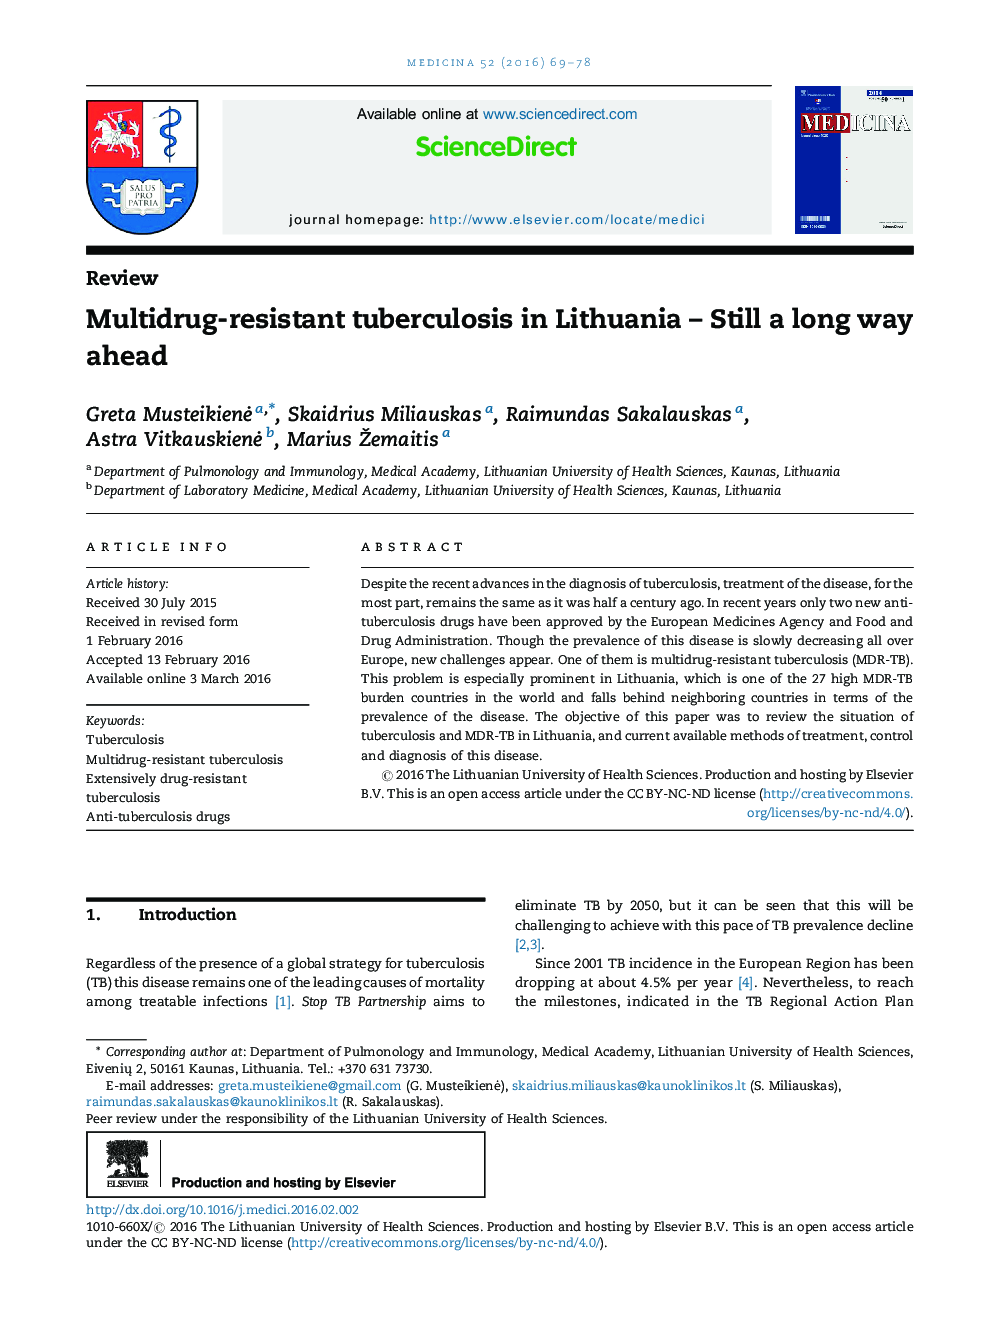 Multidrug-resistant tuberculosis in Lithuania – Still a long way ahead 